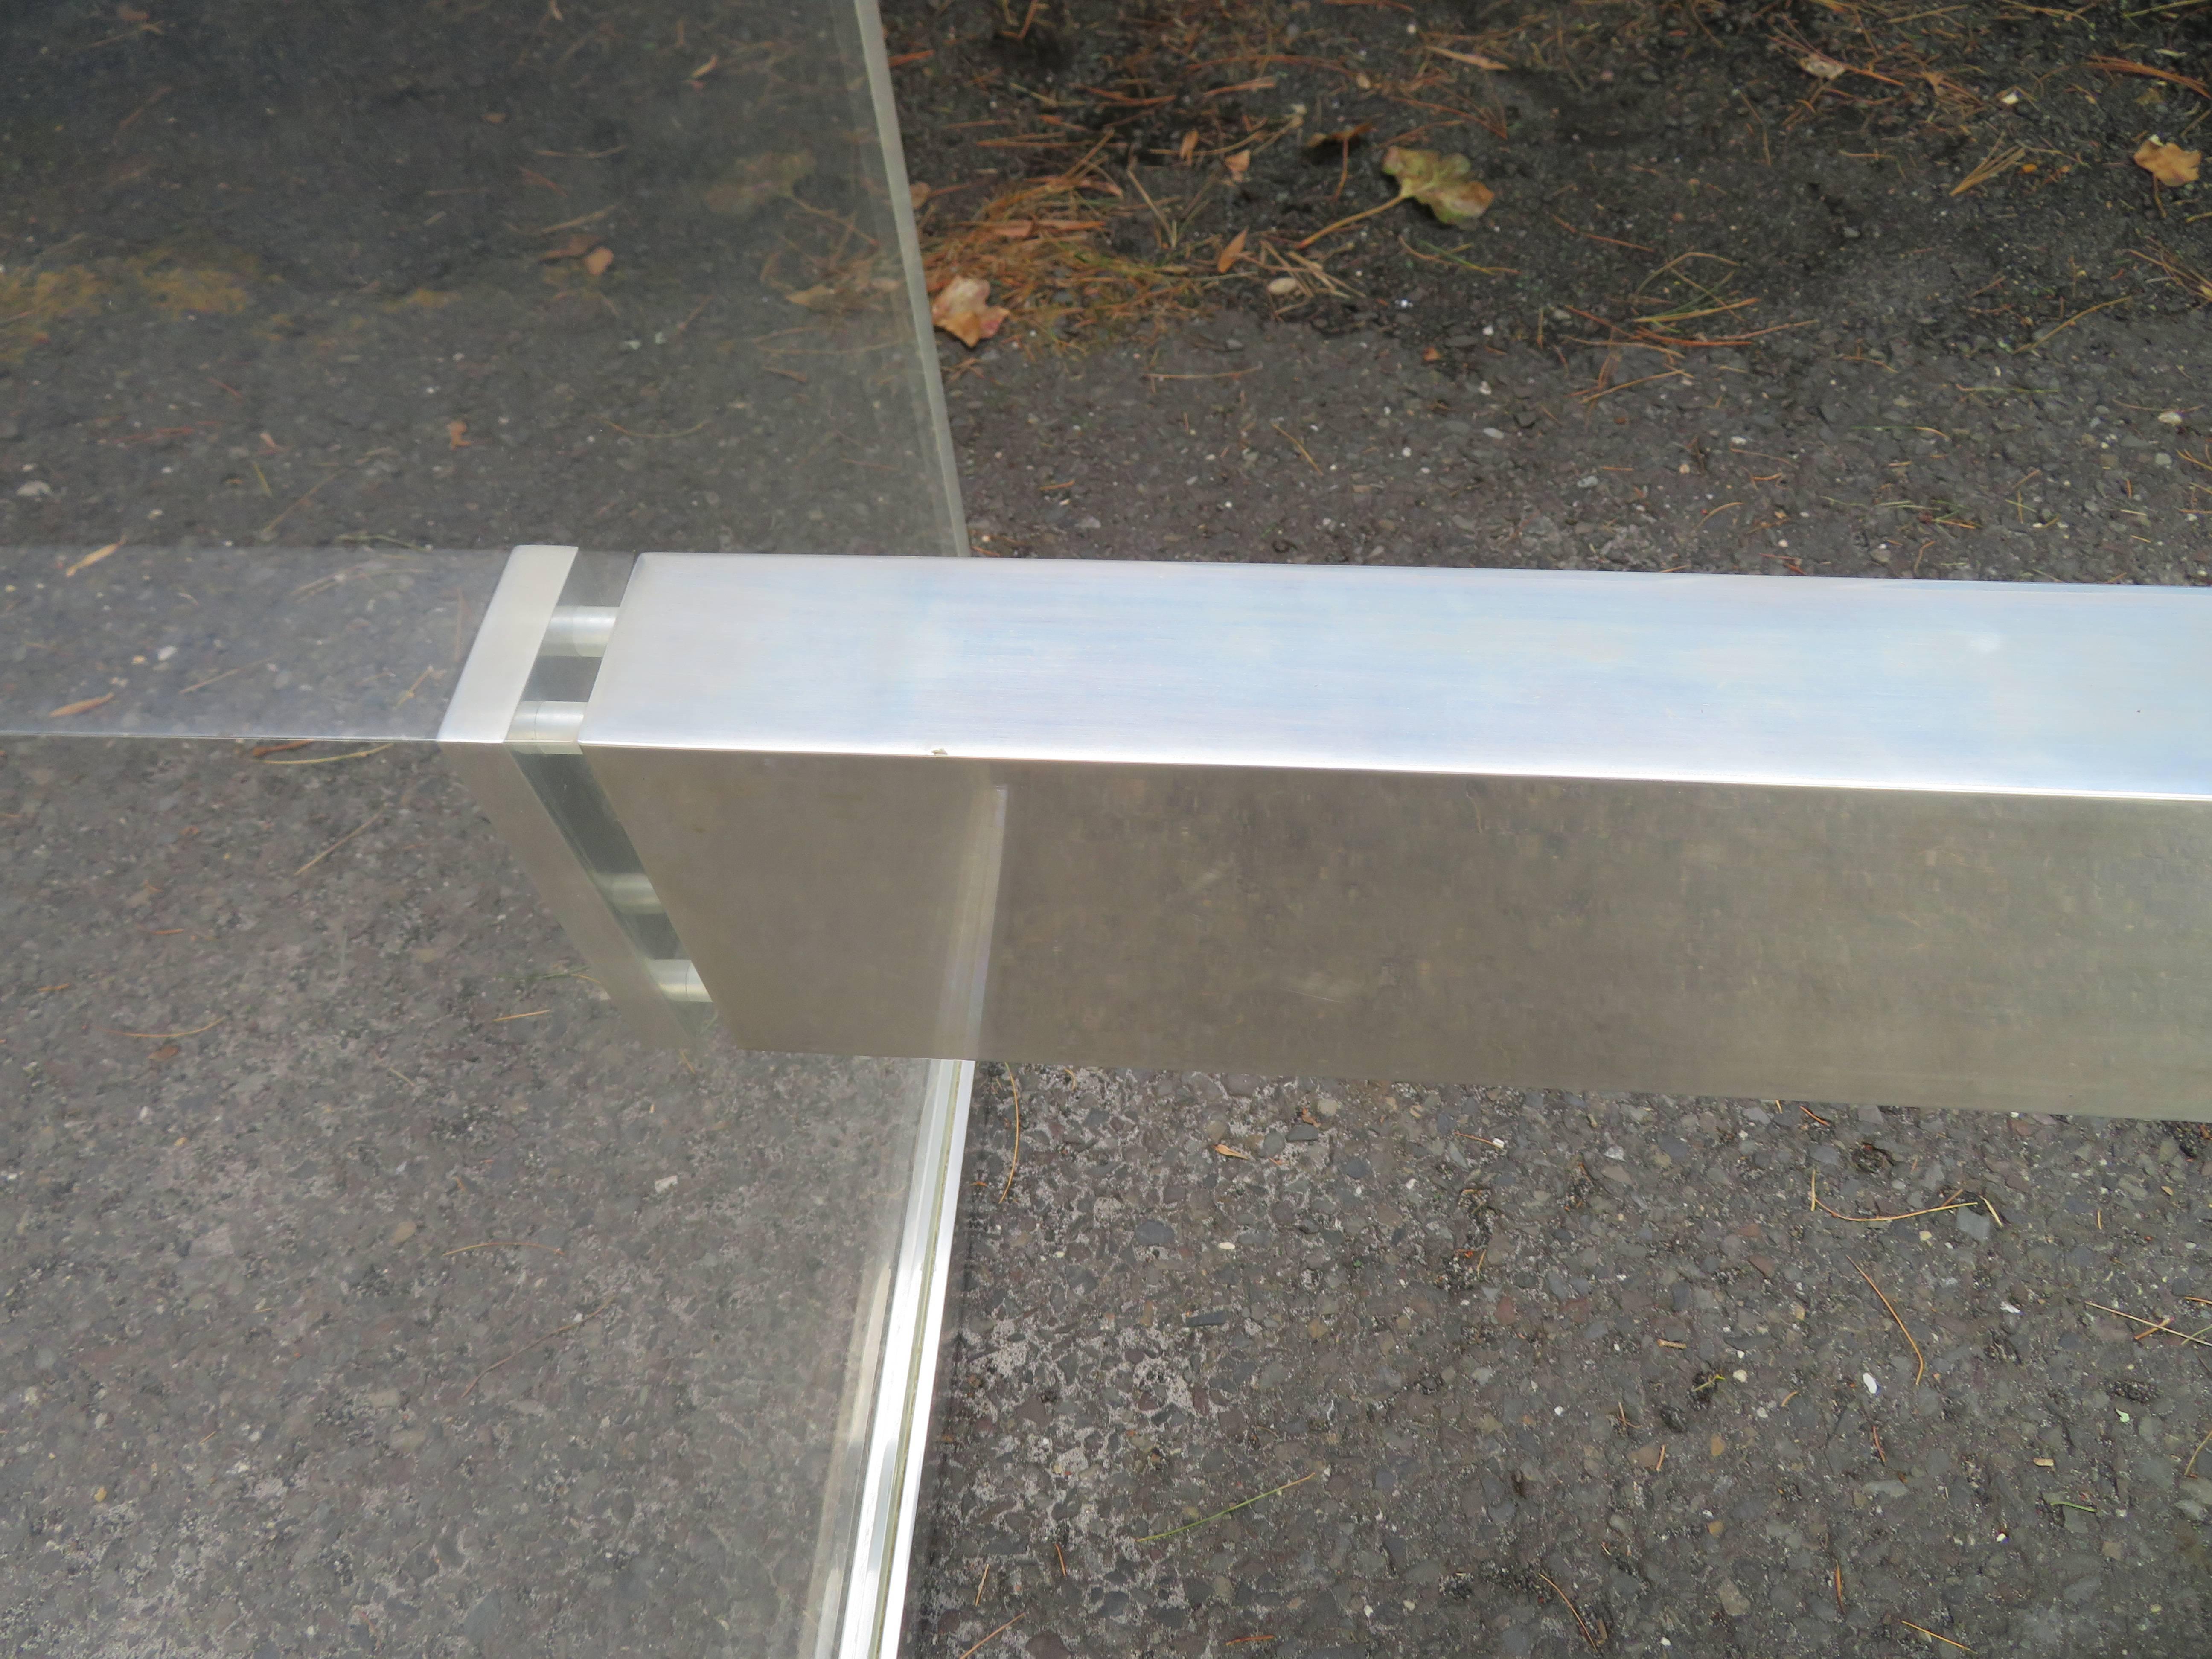 American Chunky Thick Lucite Aluminium Dining Room Table Desk Mid-Century Modern